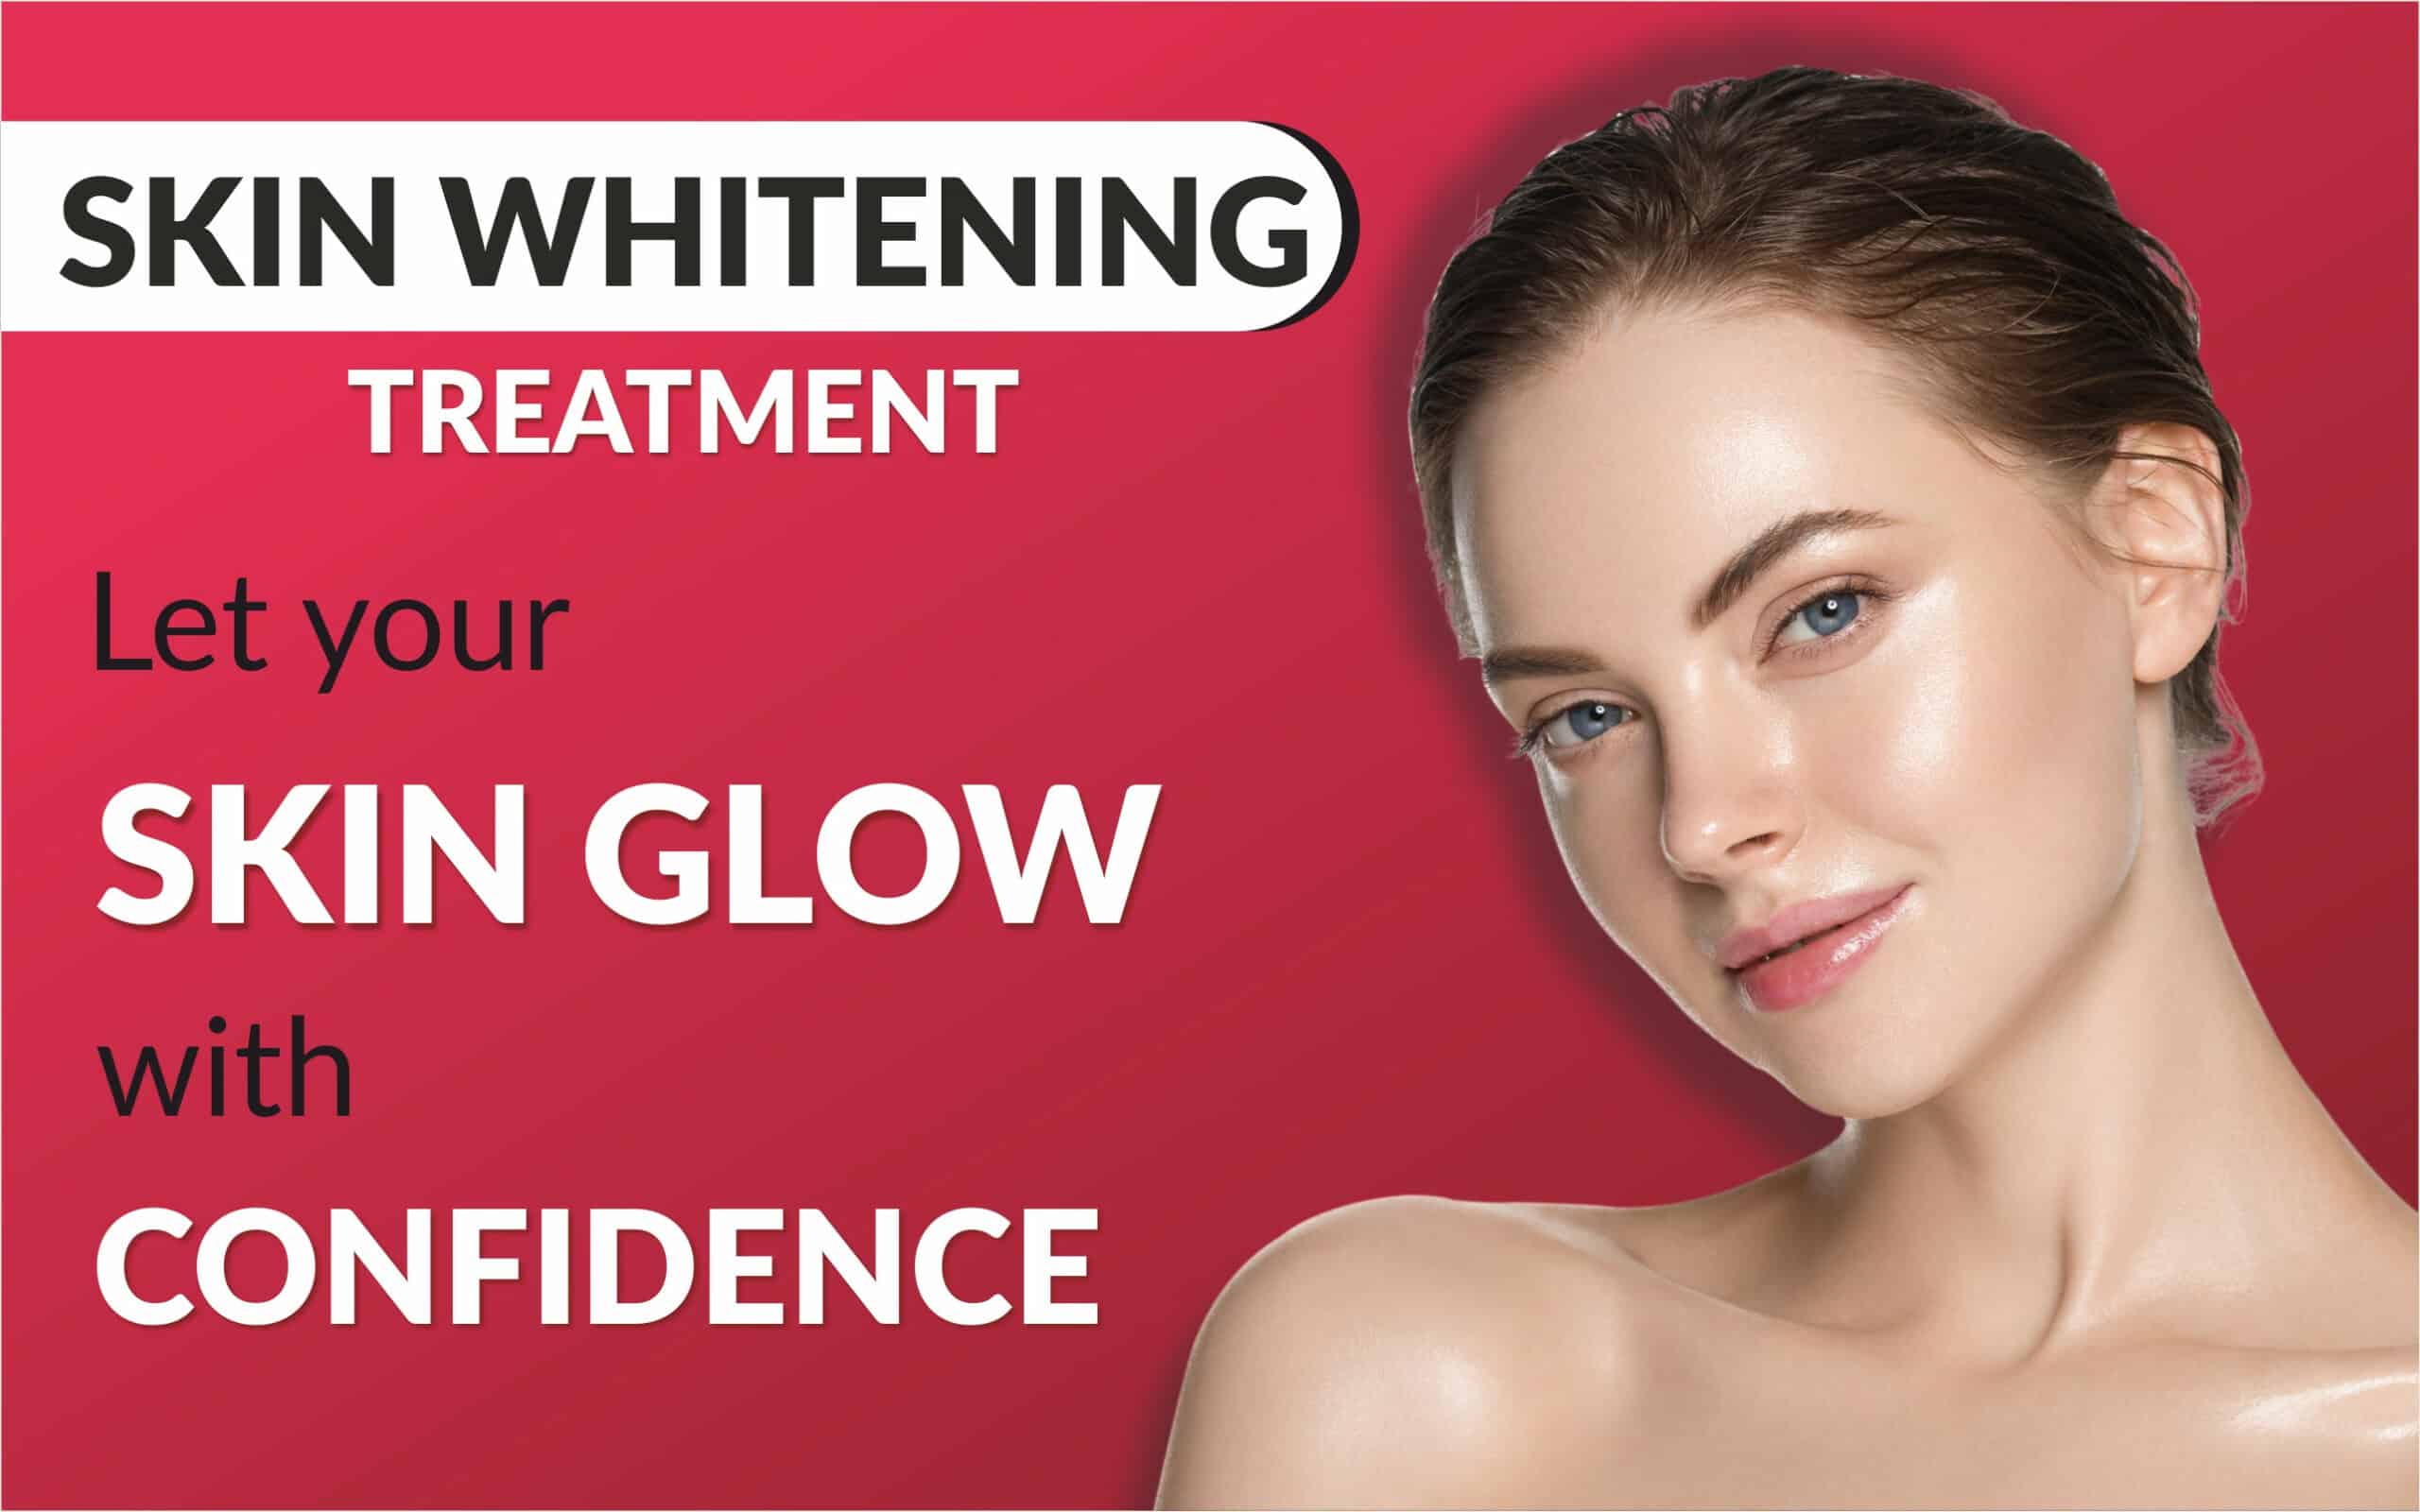 Full Body Whitening Treatment For Fair Glowing Skin Naturally and Fast at  Home